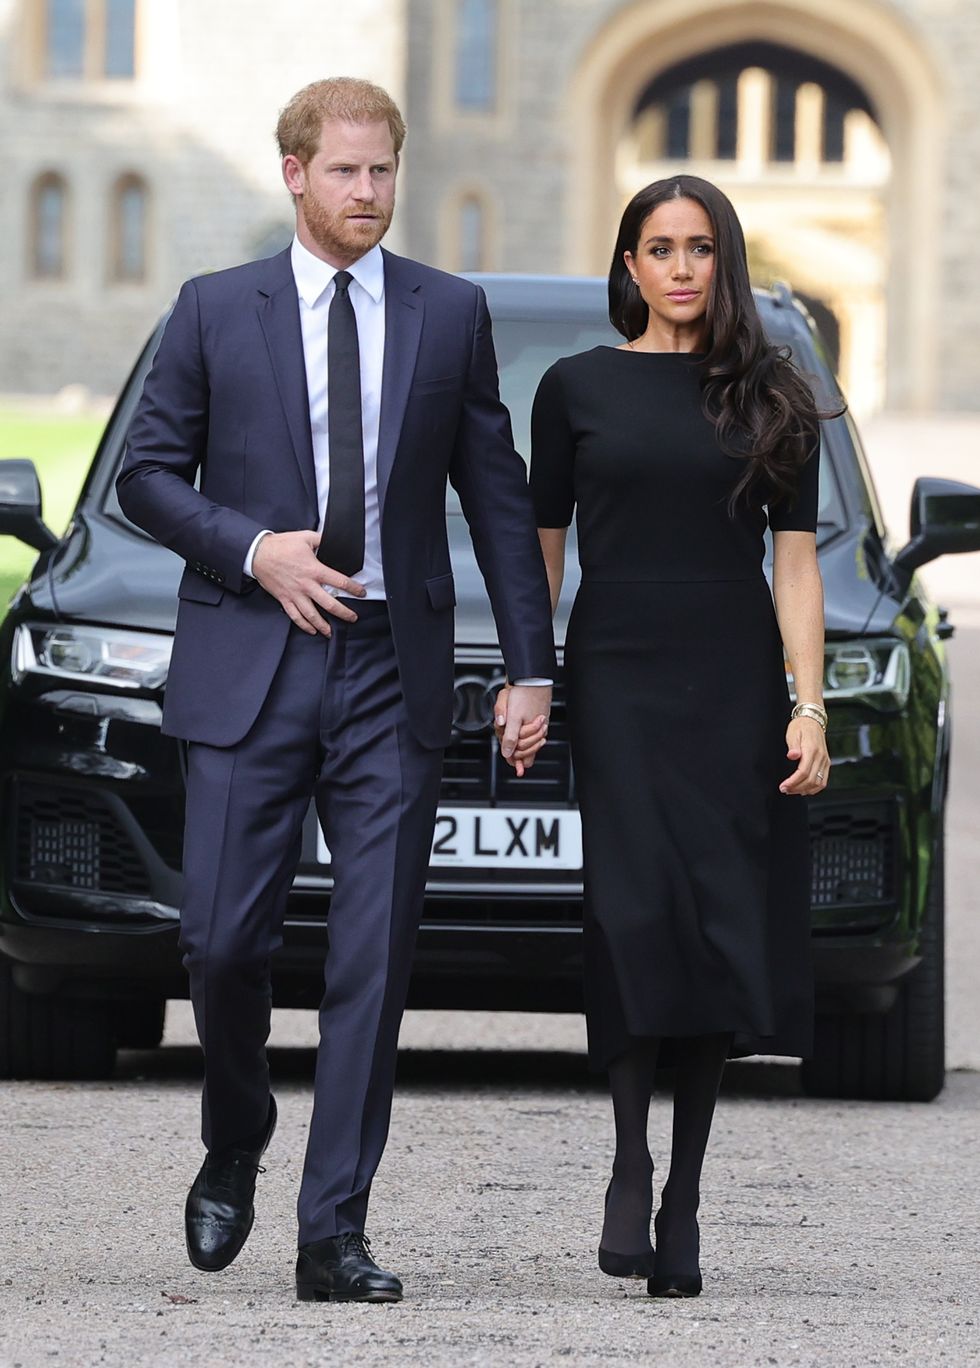 prince harry and meghan markle during the walkabout to greet wellwishers at ﻿windsor castle following the queen’s death in september 2022﻿